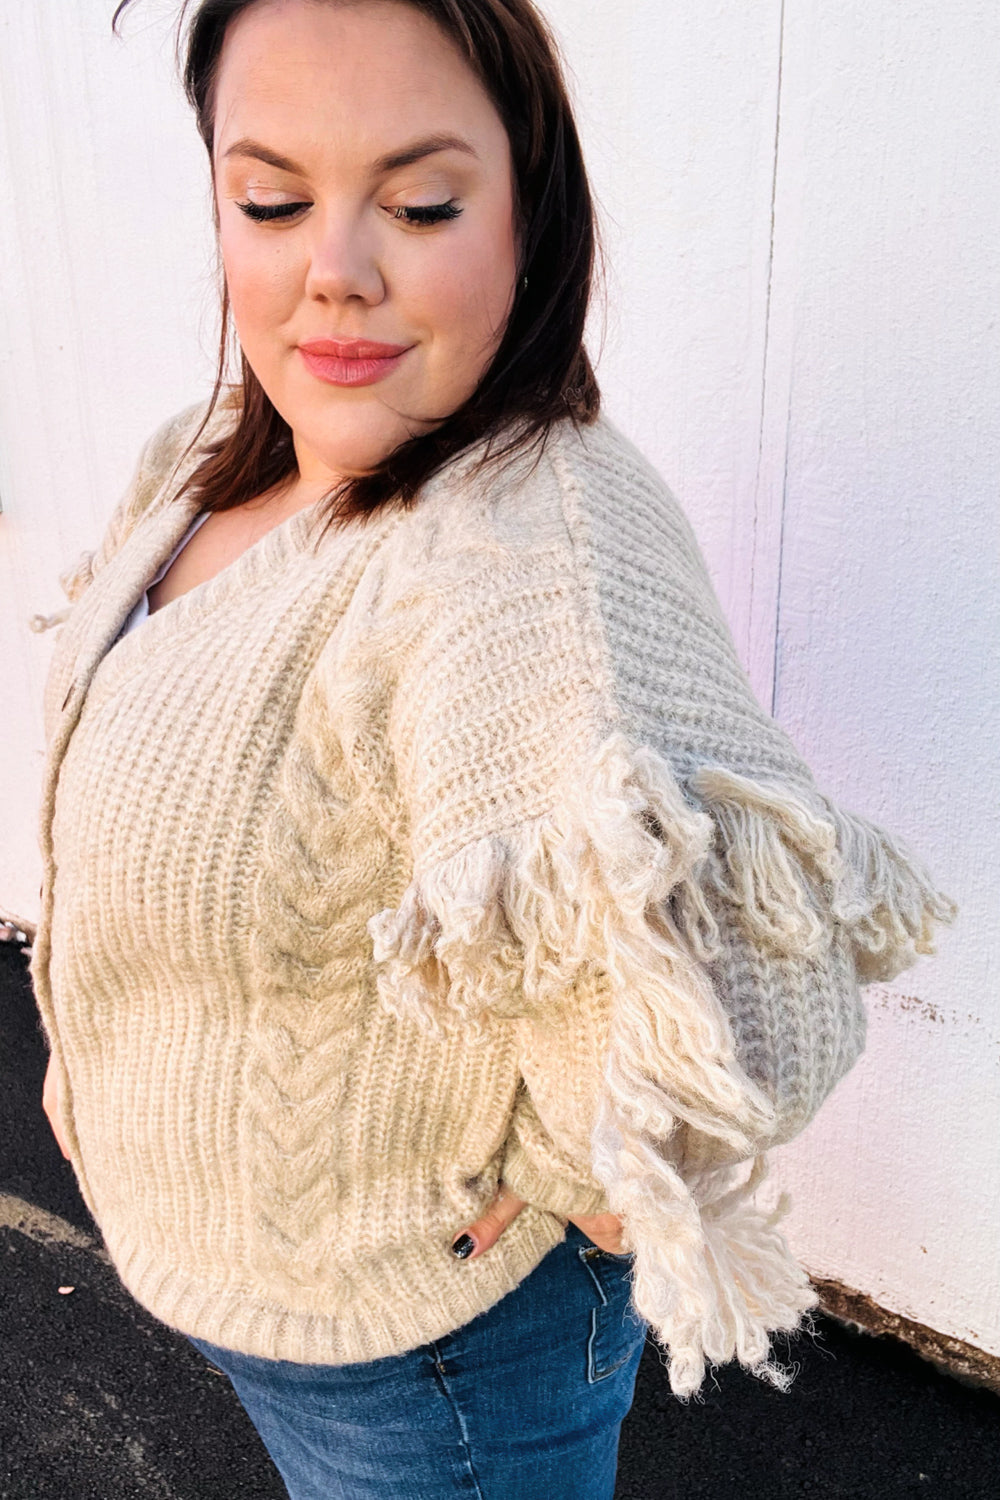 Way To Go - Chunky Cable Knit Cardigan